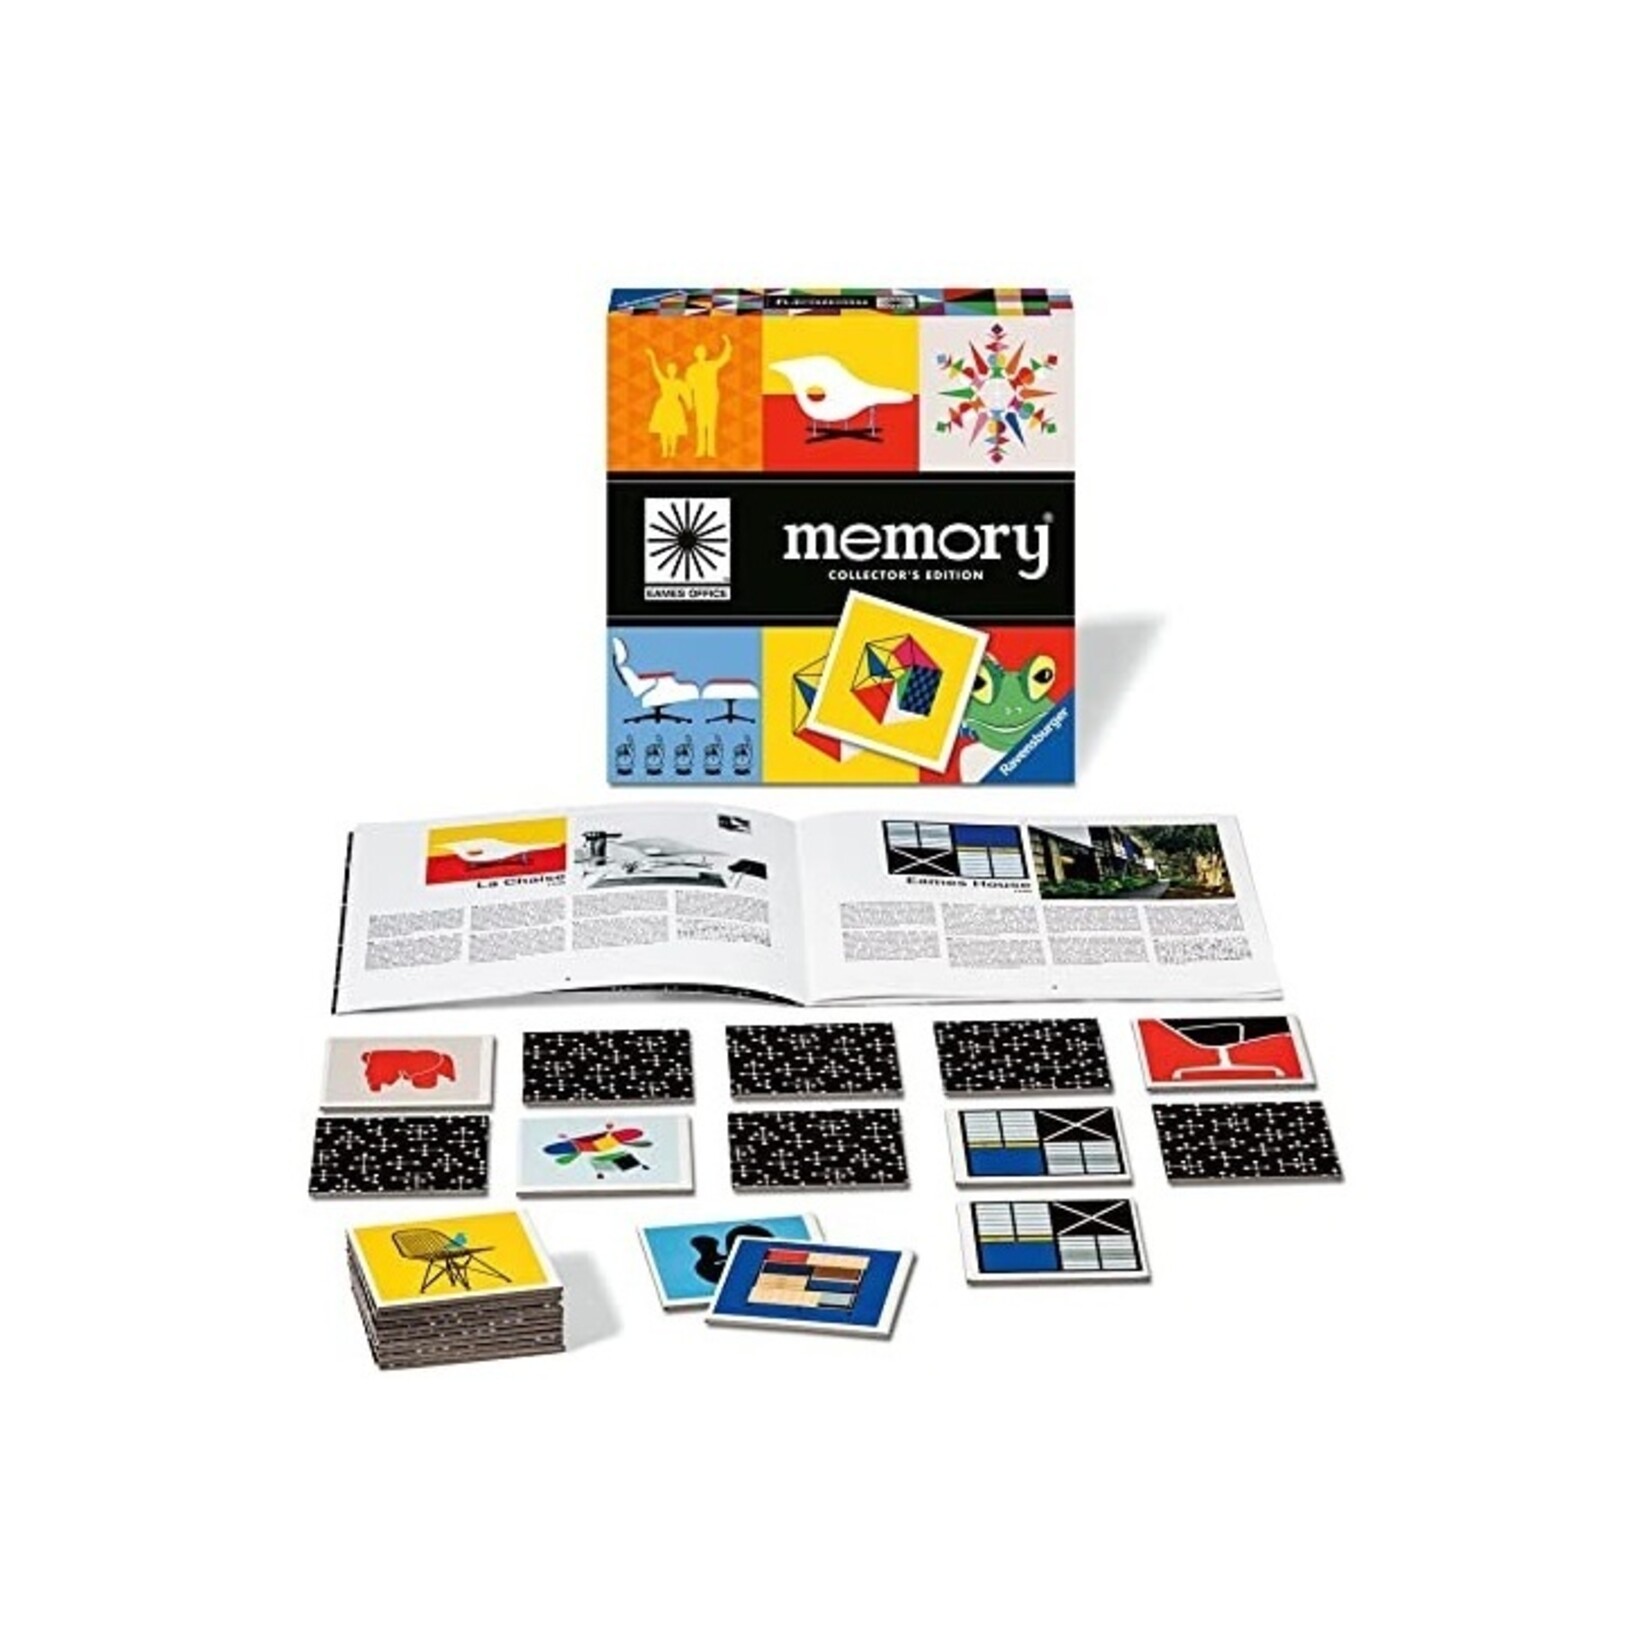 Ravensburger Memory - Collector's edition - Eames office